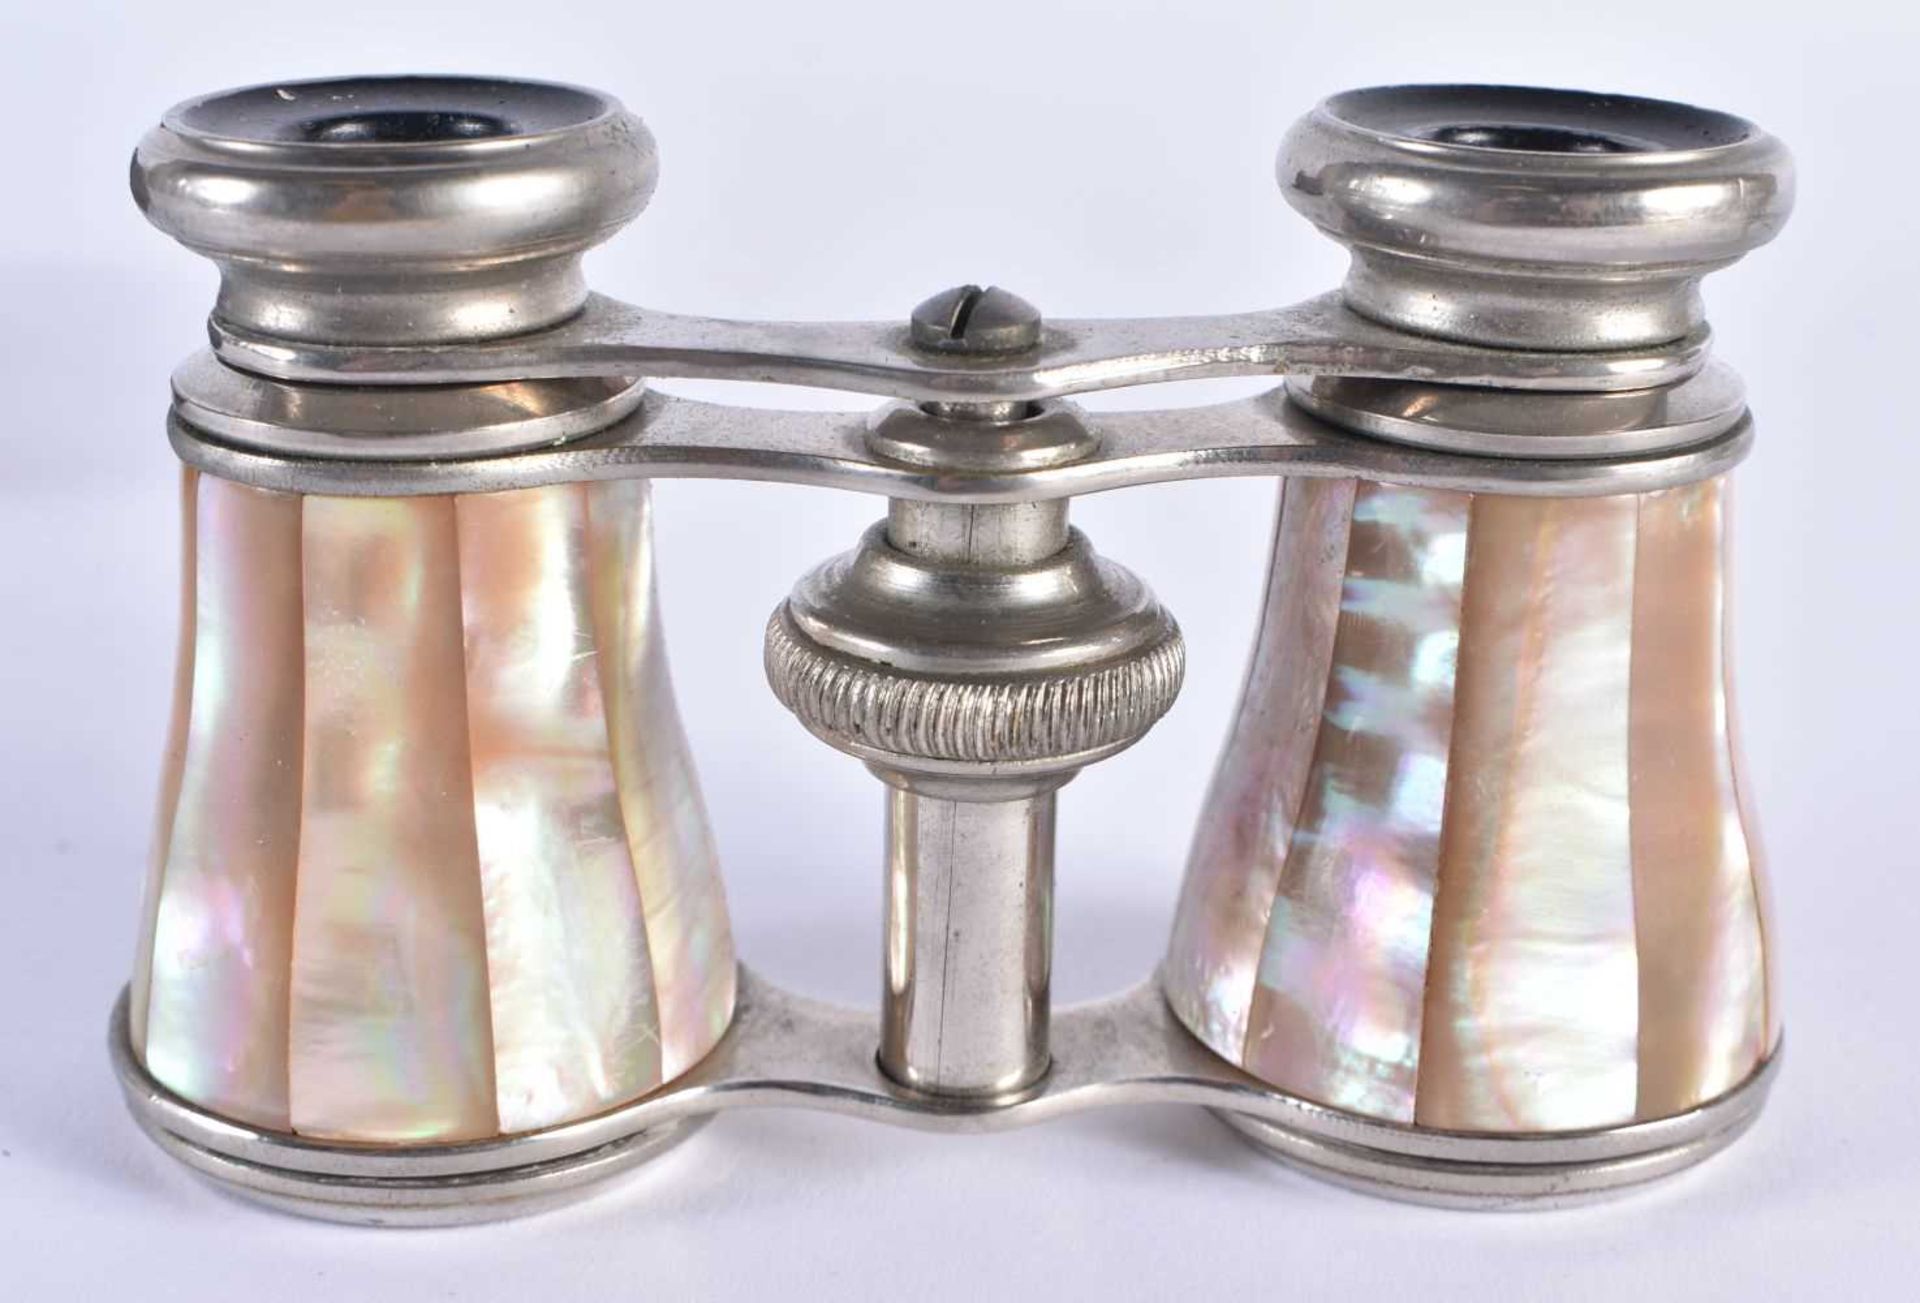 A PAIR OF MOTHER OF PEARL OPERA GLASSES. 9 cm x 8 cm extended. - Image 2 of 4